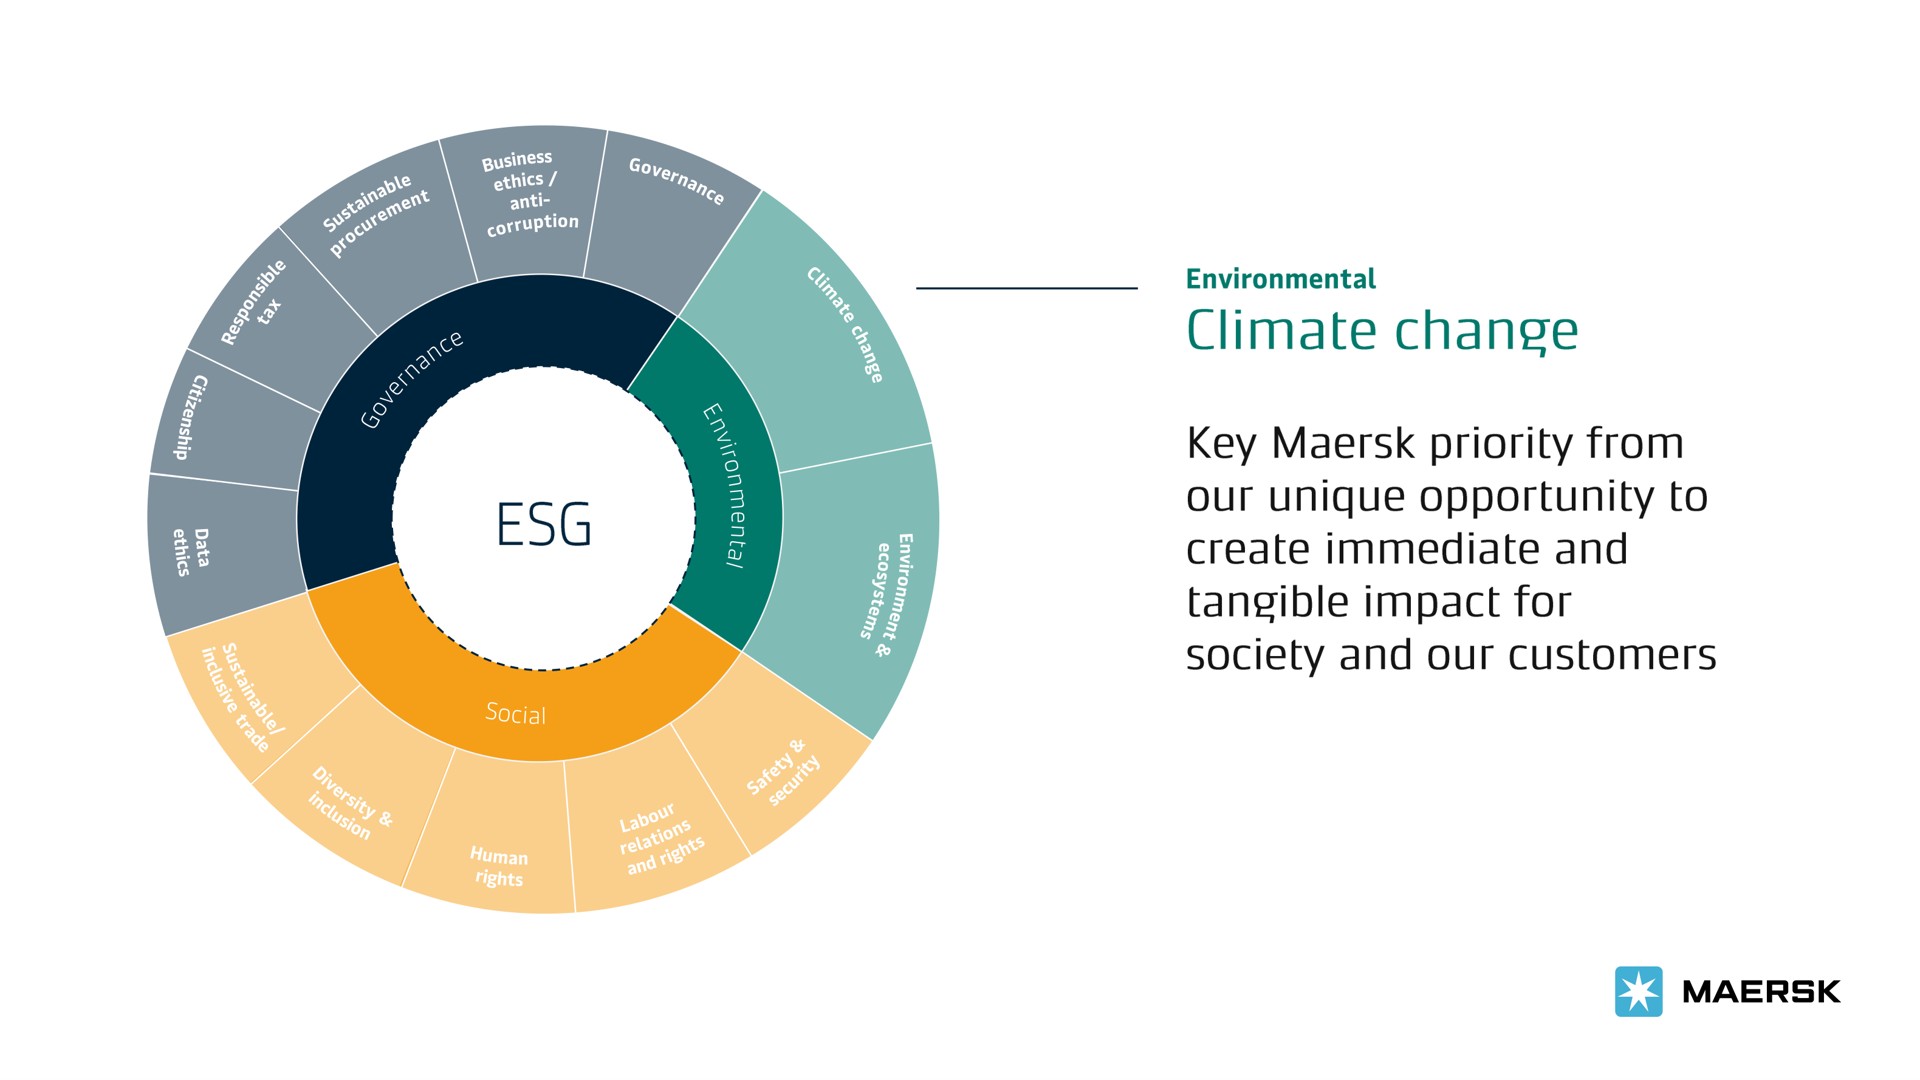 climate change key priority from our unique opportunity to create immediate and tangible impact for society and our customers | Maersk